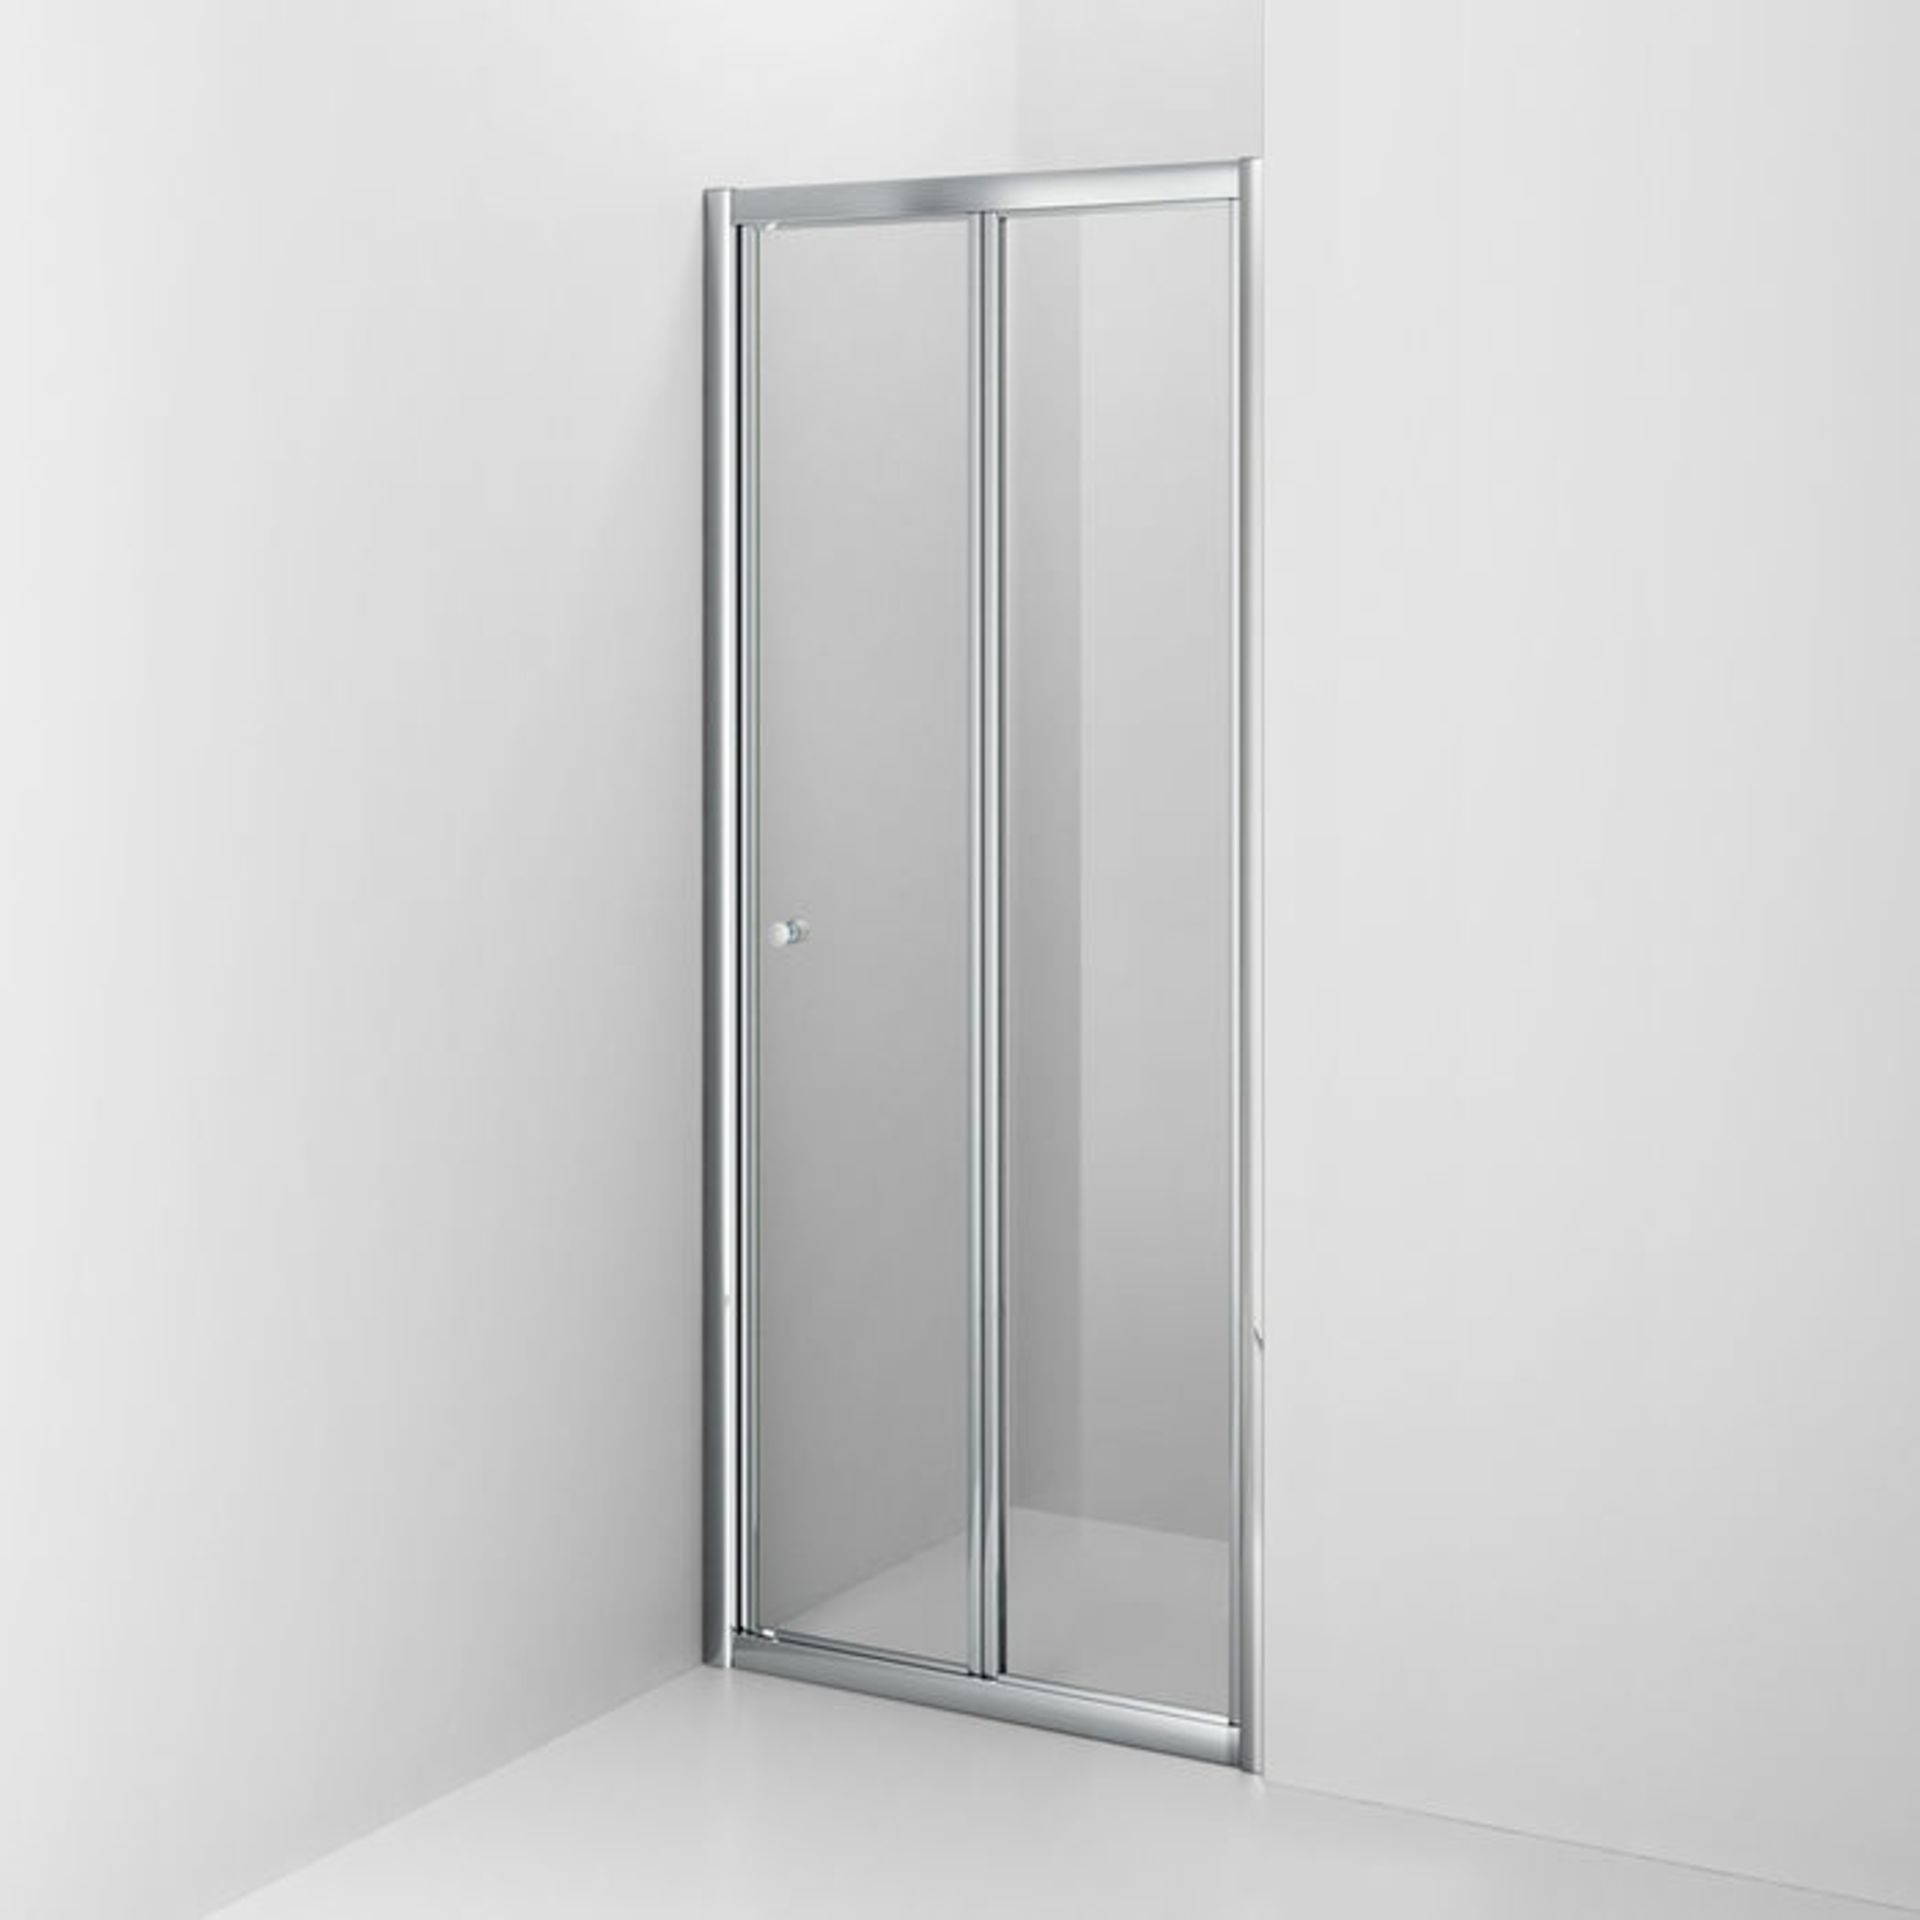 (H94) 700mm - Elements Bi Fold Shower Door 4mm Safety Glass Fully waterproof tested with cushioned - Image 4 of 4